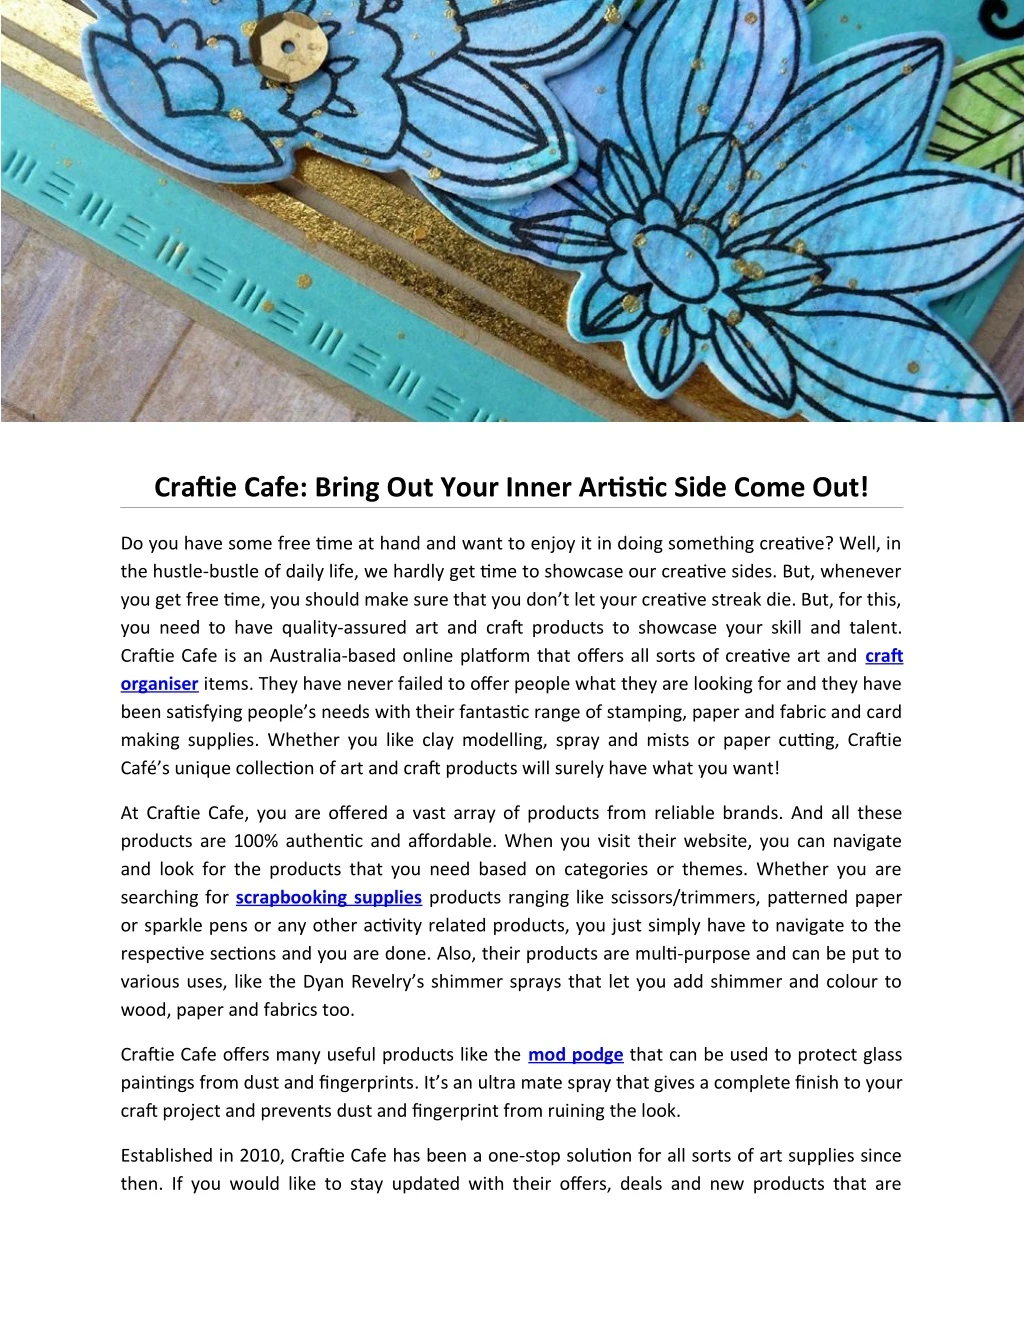 craftie cafe bring out your inner artistic side